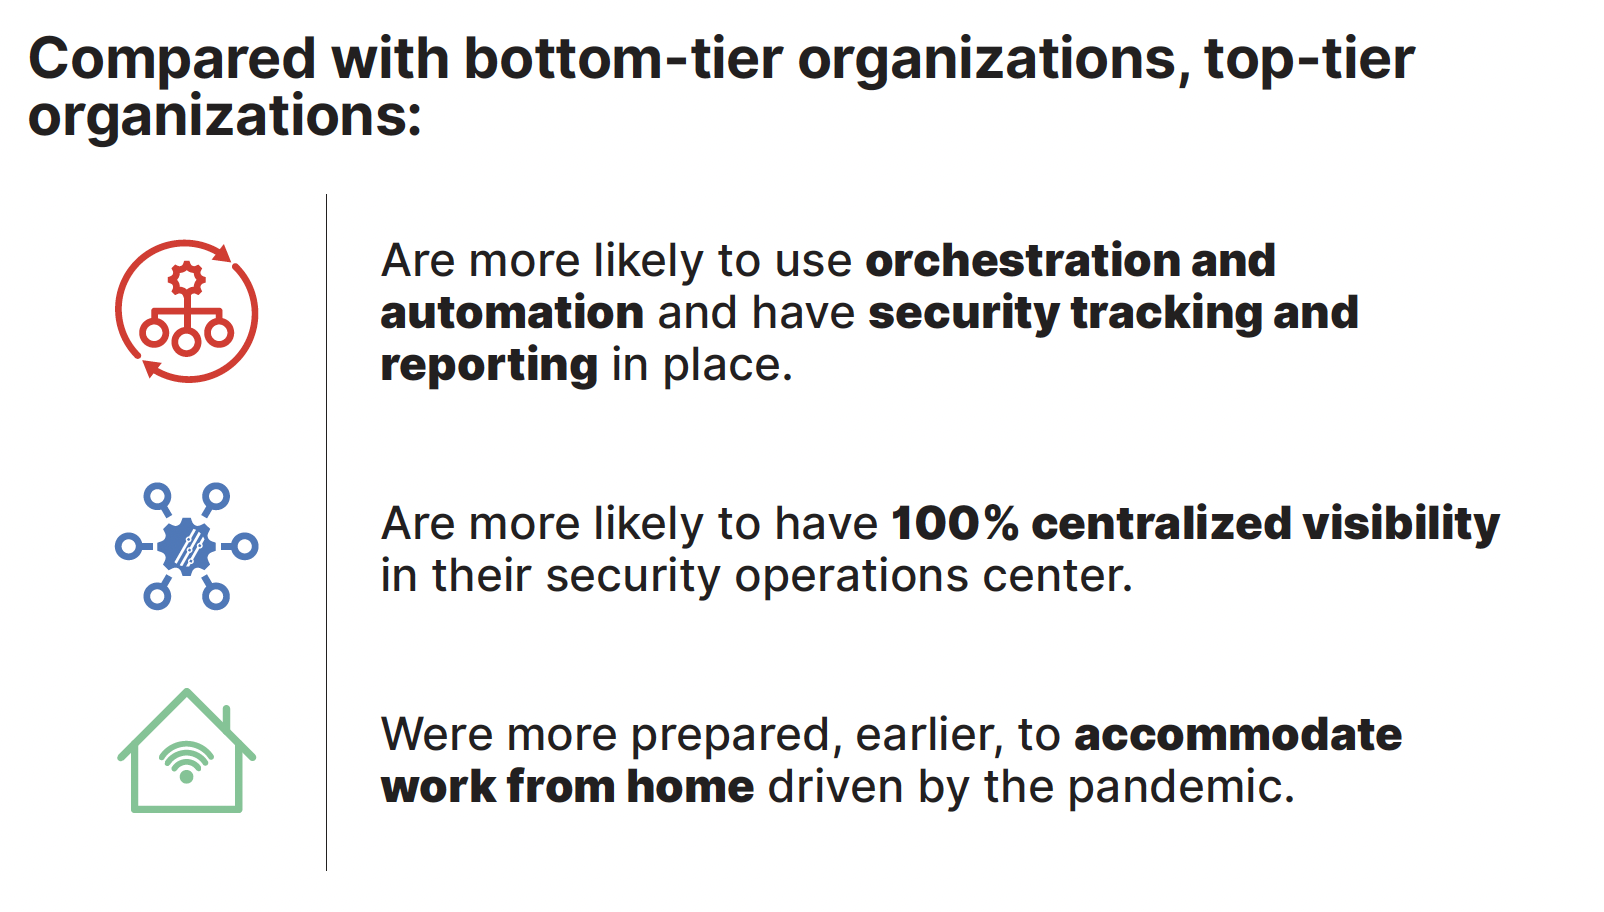 Compared with bottom-tier organizations, top-tier organizations